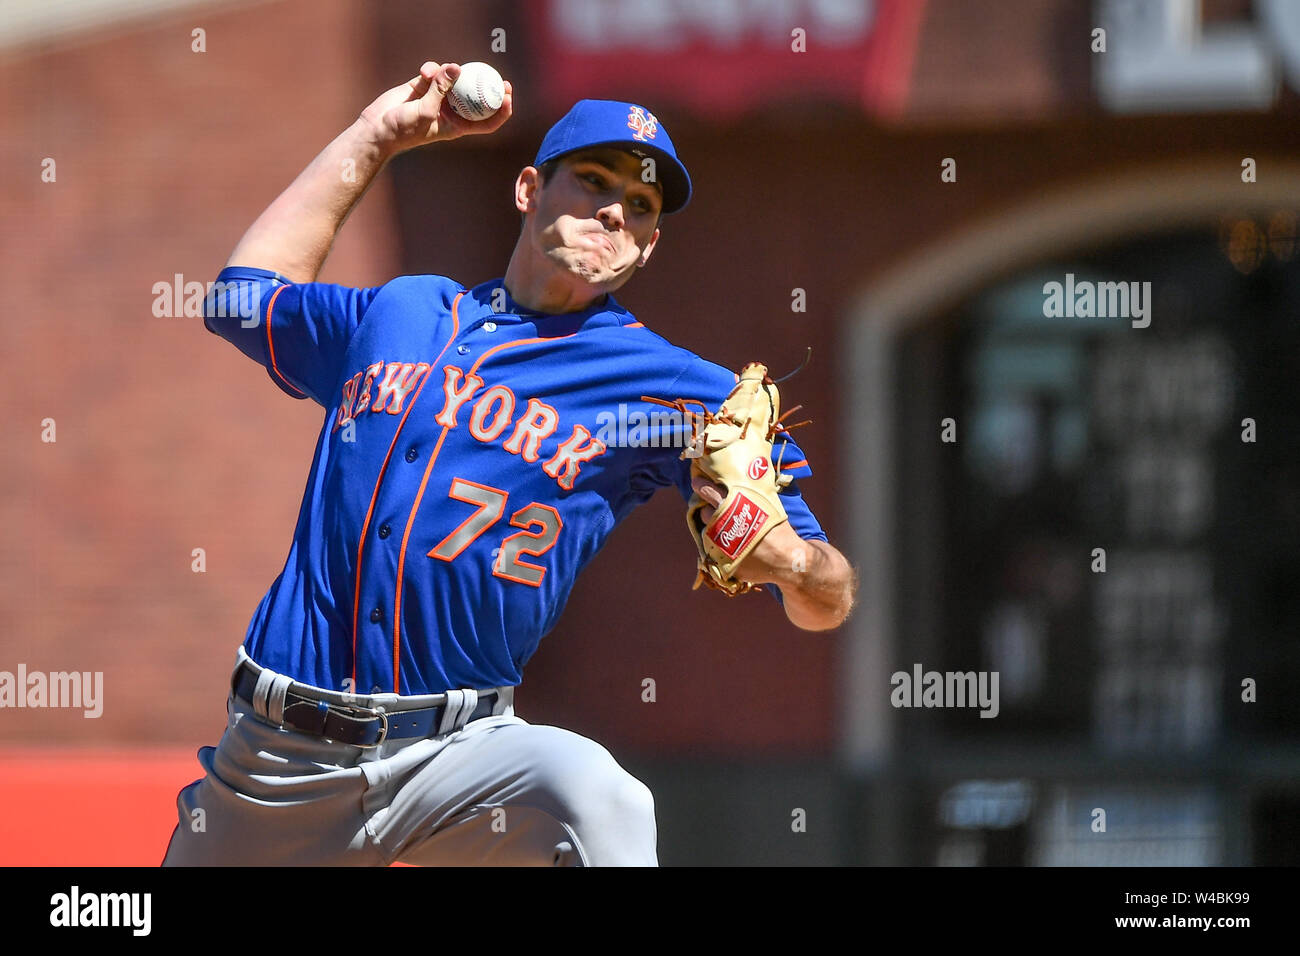 San Francisco, CA. 20th July, 2019. New York Mets relief pitcher Stephen Nogosek (72) in action during the MLB game between the New York Mets and the San Francisco Giants at Oracle Park in San Francisco, CA. Chris Brown/CSM/Alamy Live News Stock Photo